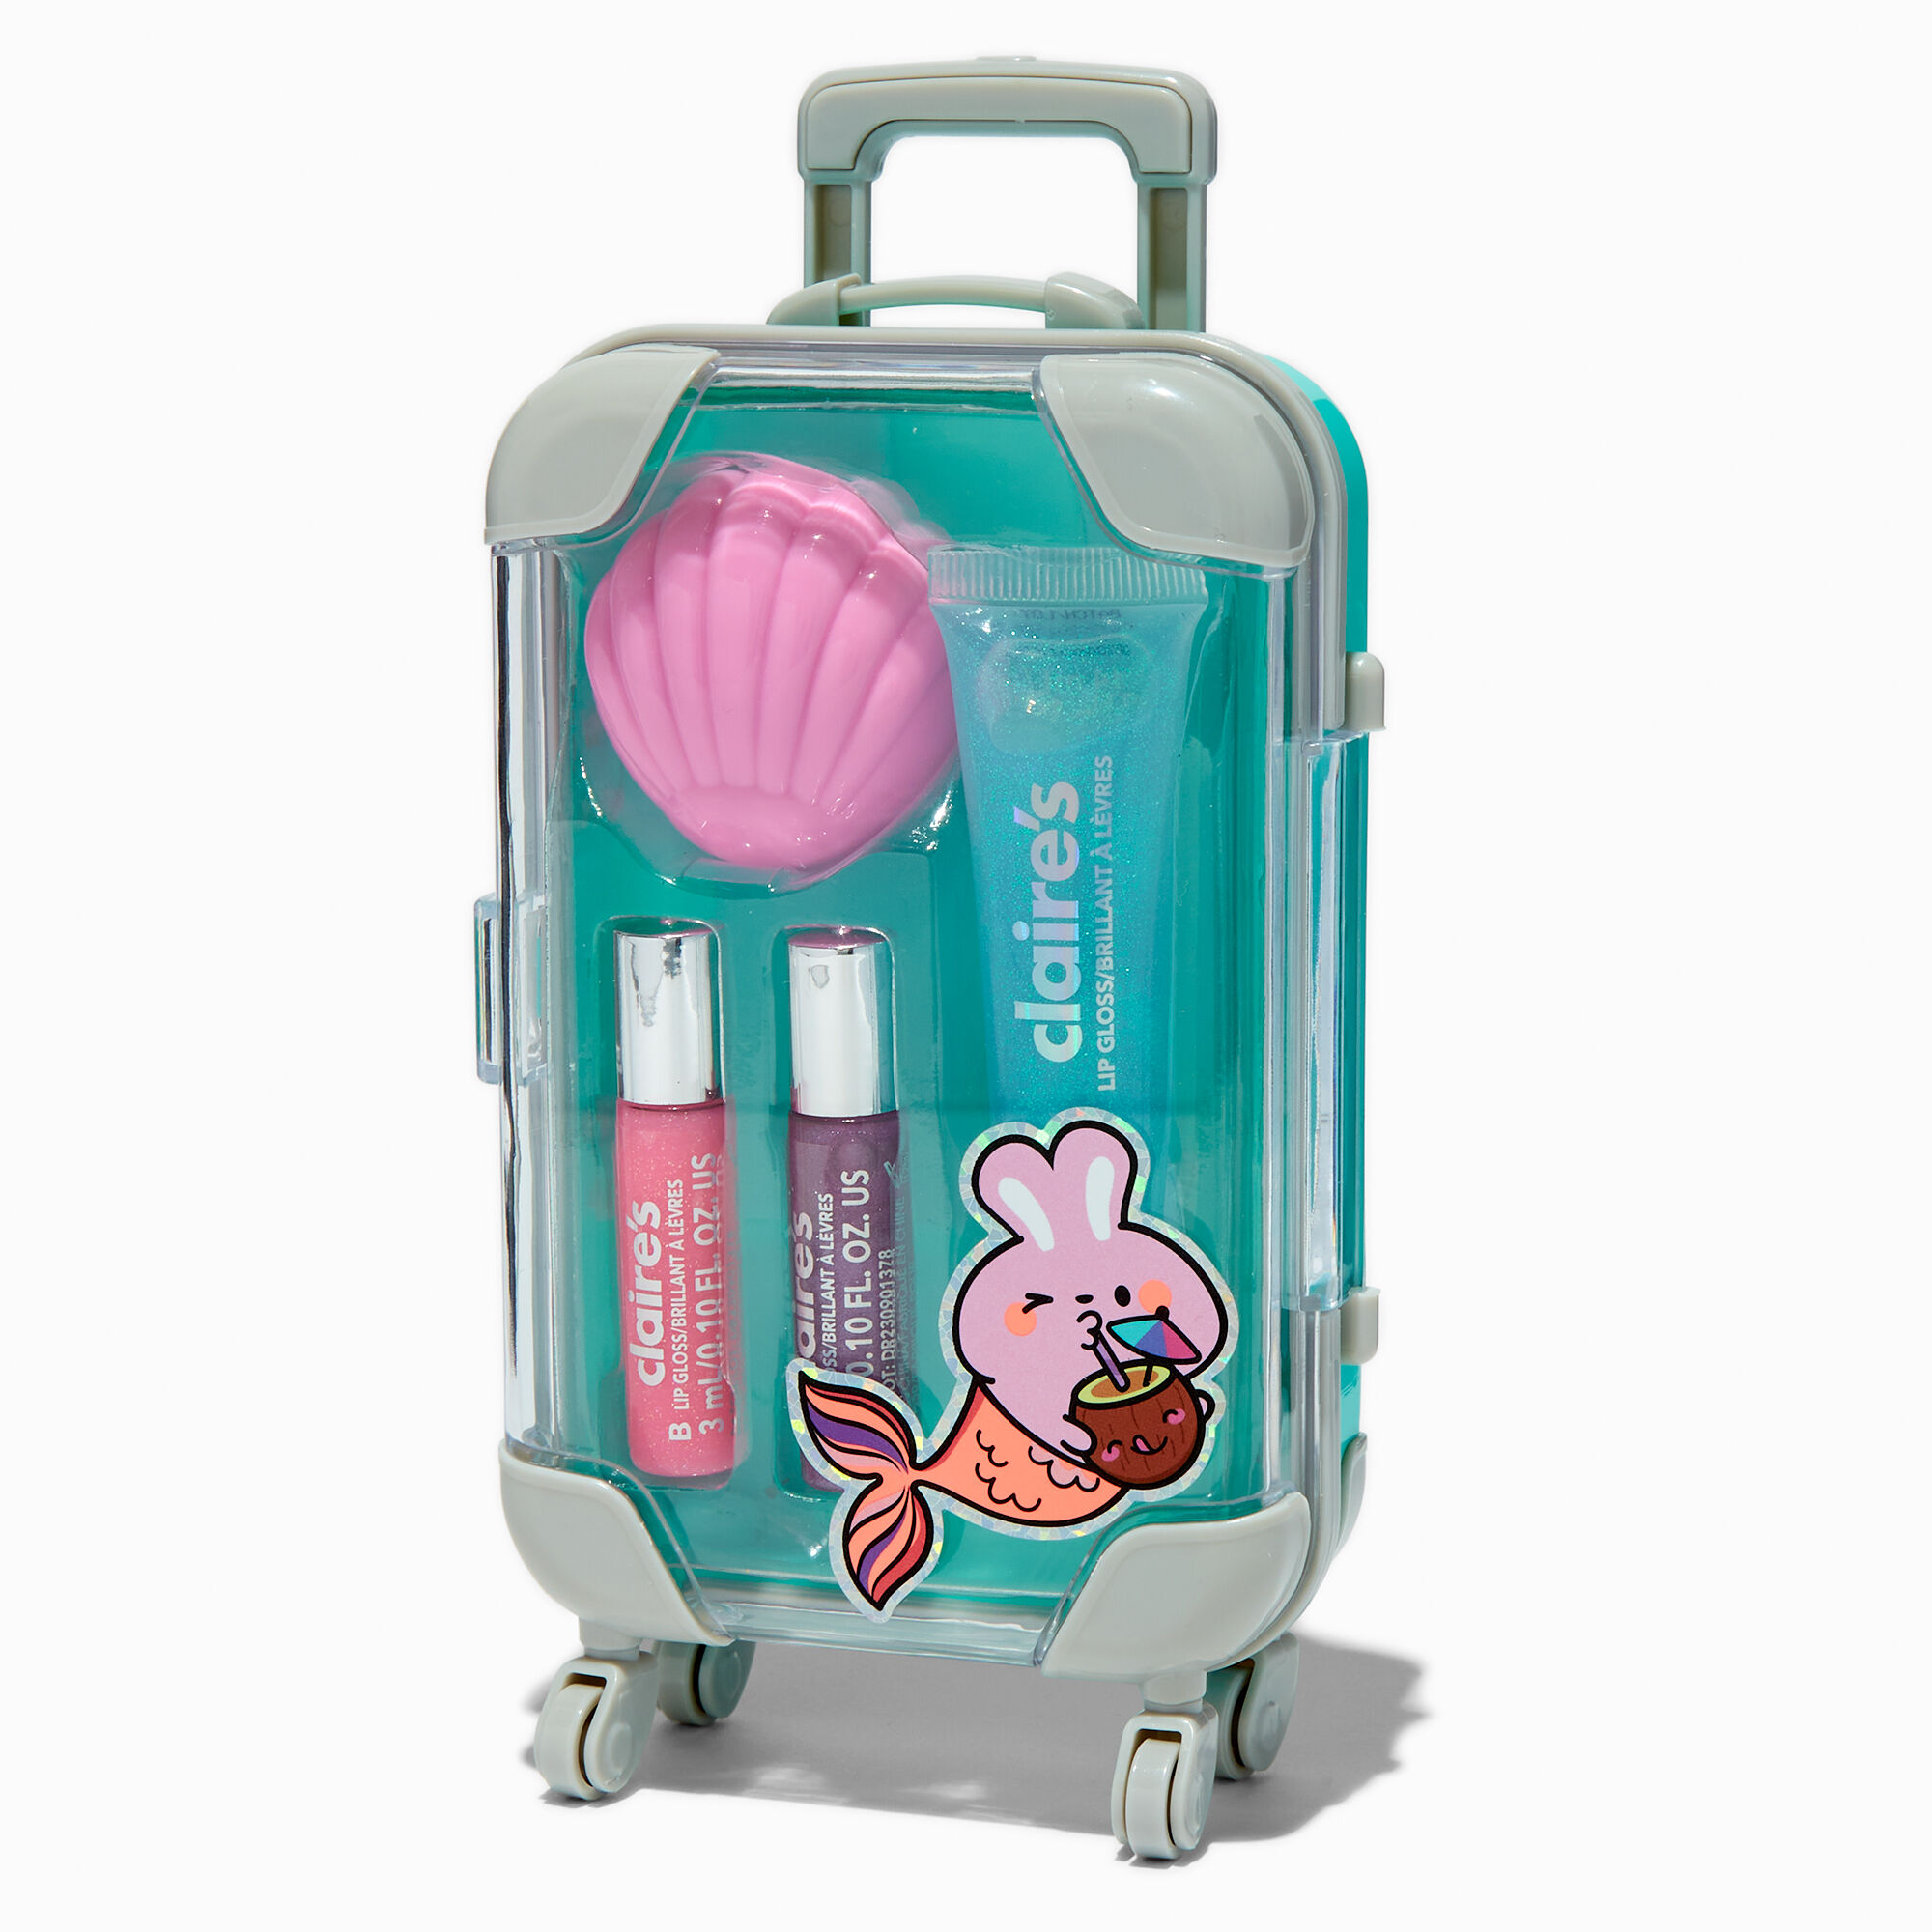 View Claires Mermaid Critter Luggage Lip Gloss Set information